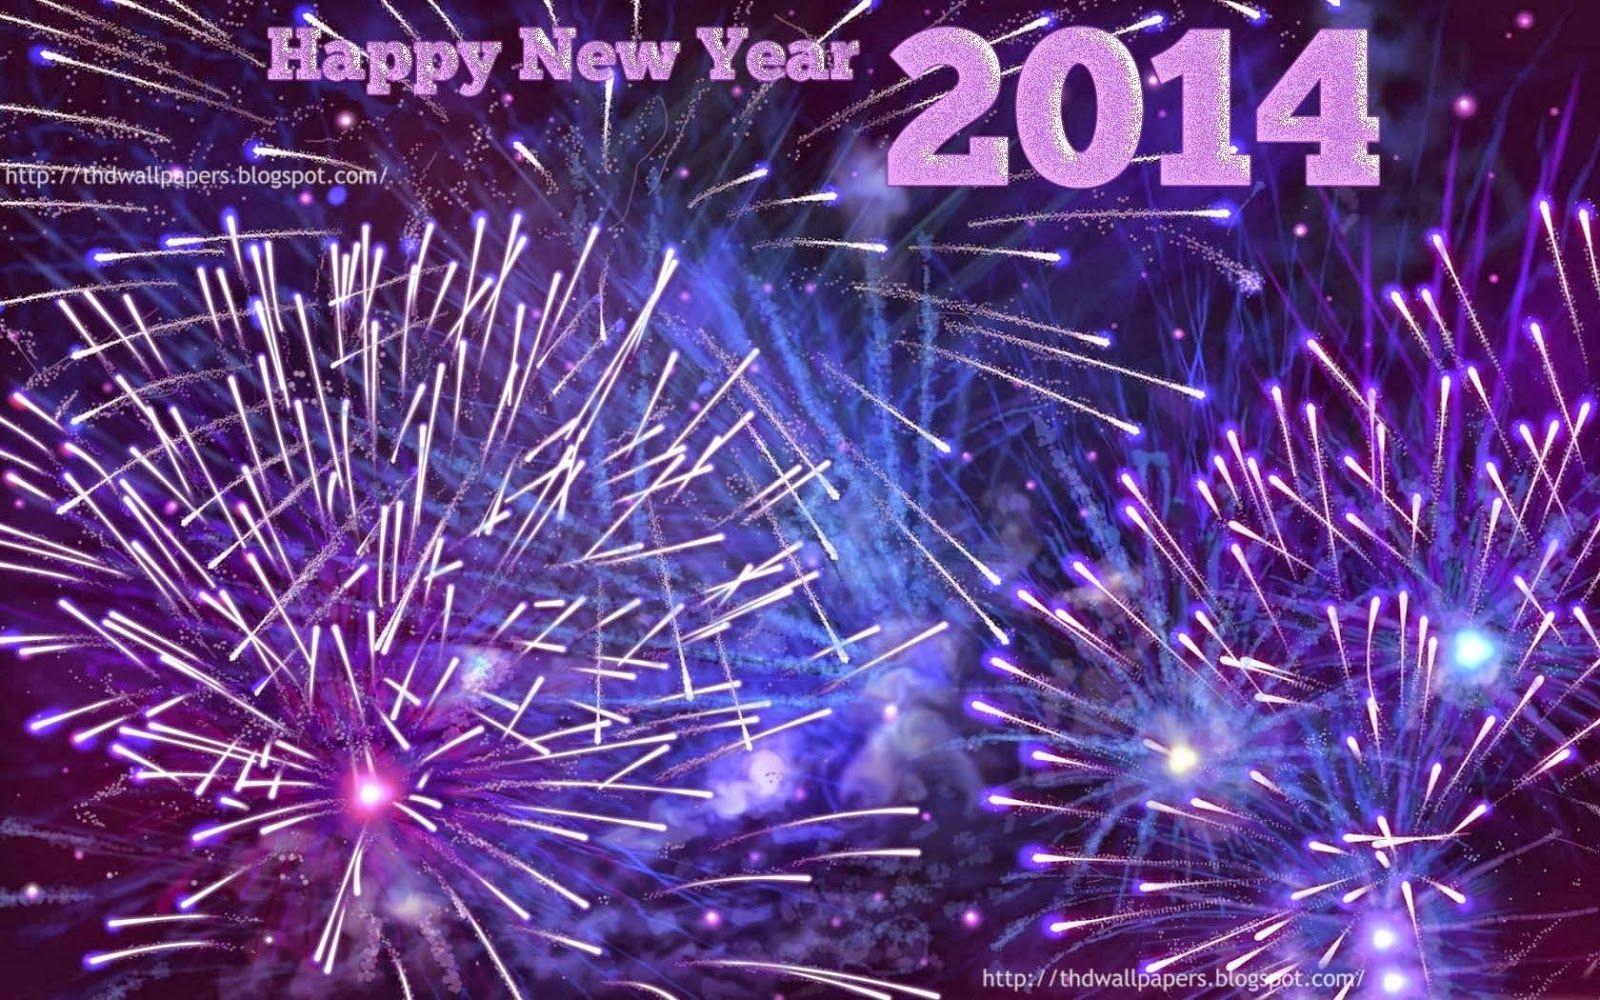 Happy New Year Wallpaper Image Photo Full Size HD For Laptop PC